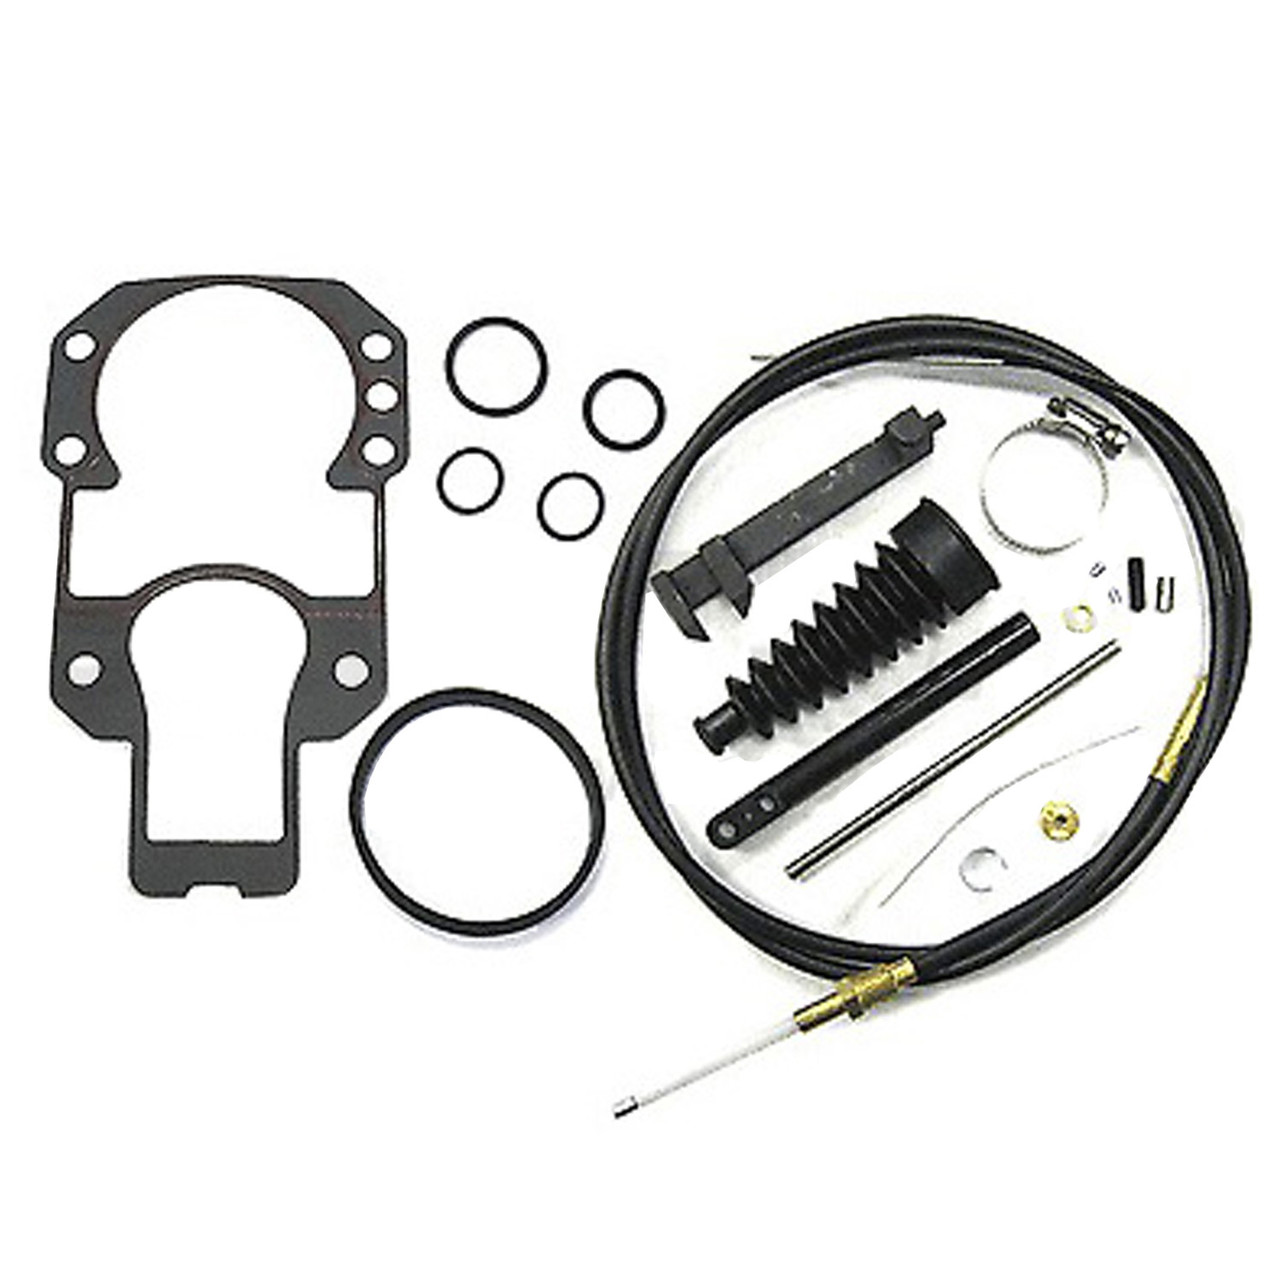 Mercruiser New OEM, Shift Cable And Bellows Repair Kit, 865436A03  8M0176525